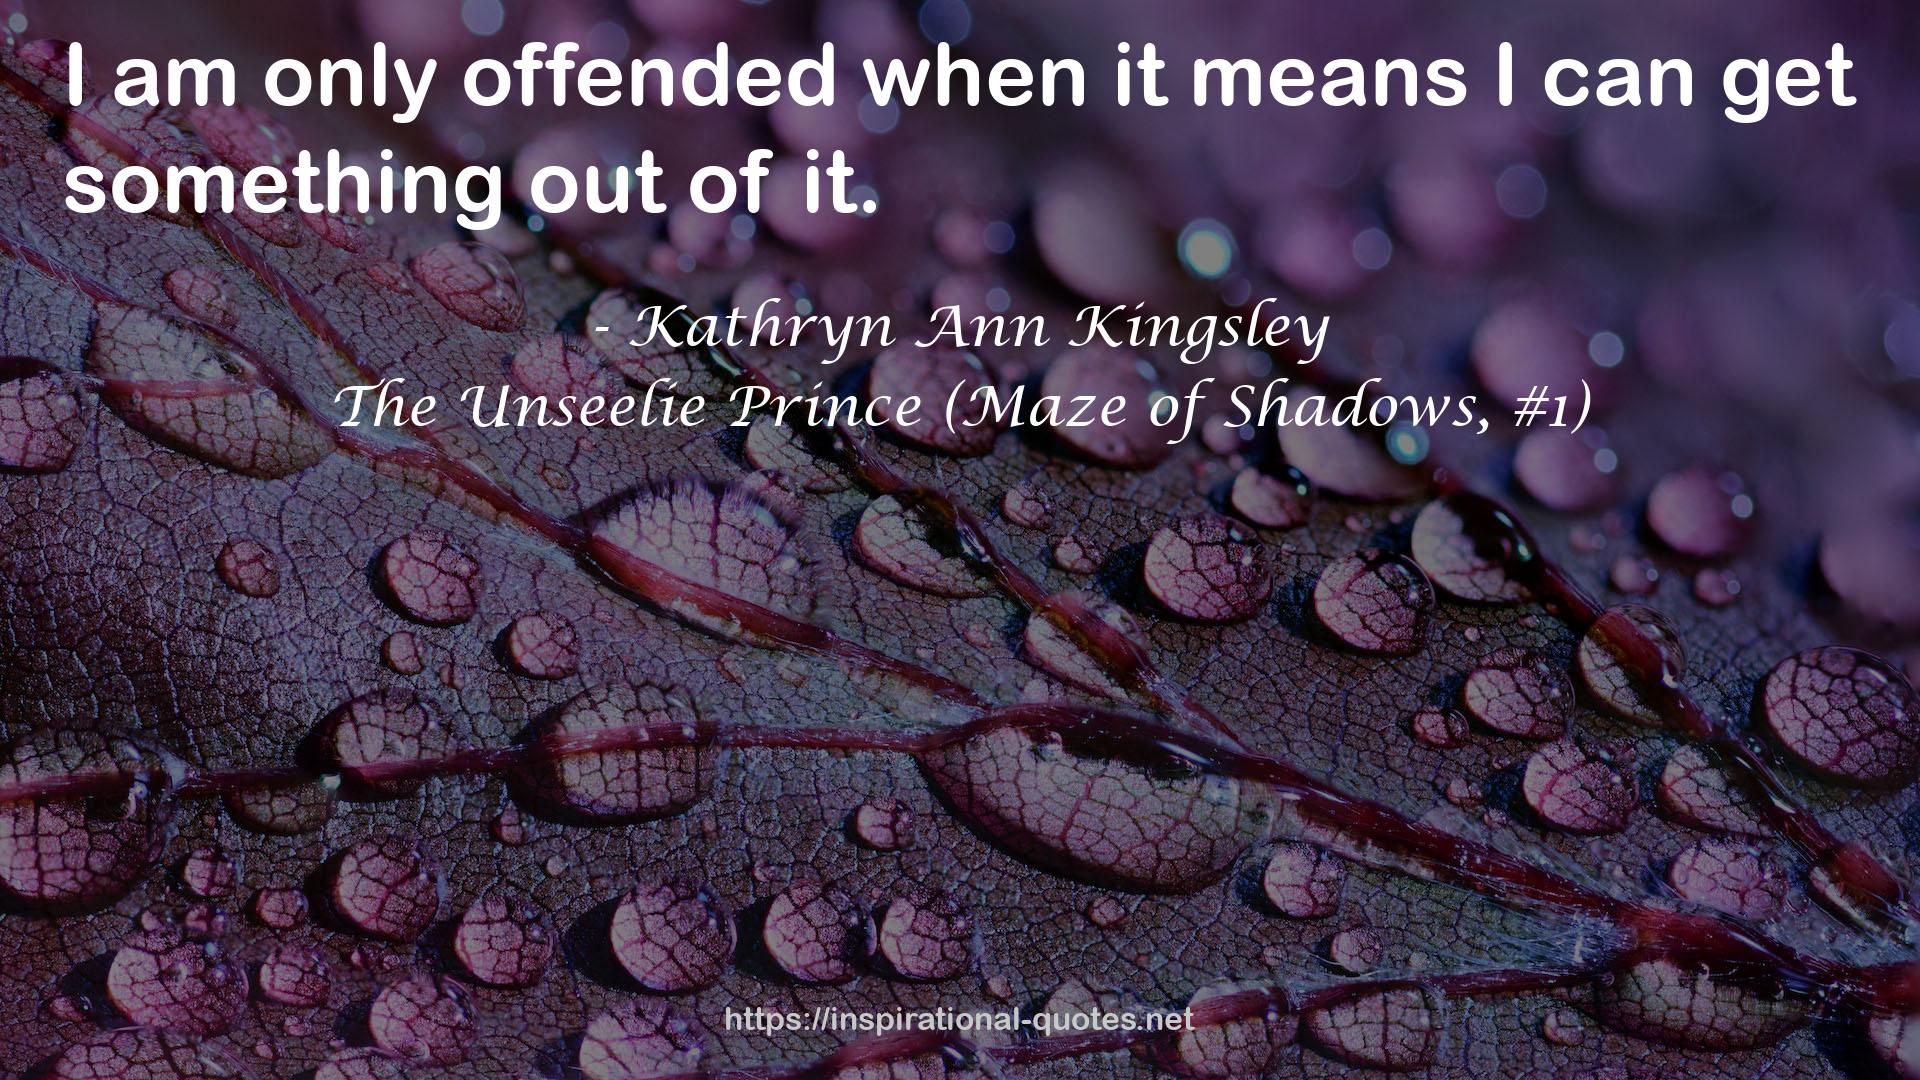 The Unseelie Prince (Maze of Shadows, #1) QUOTES